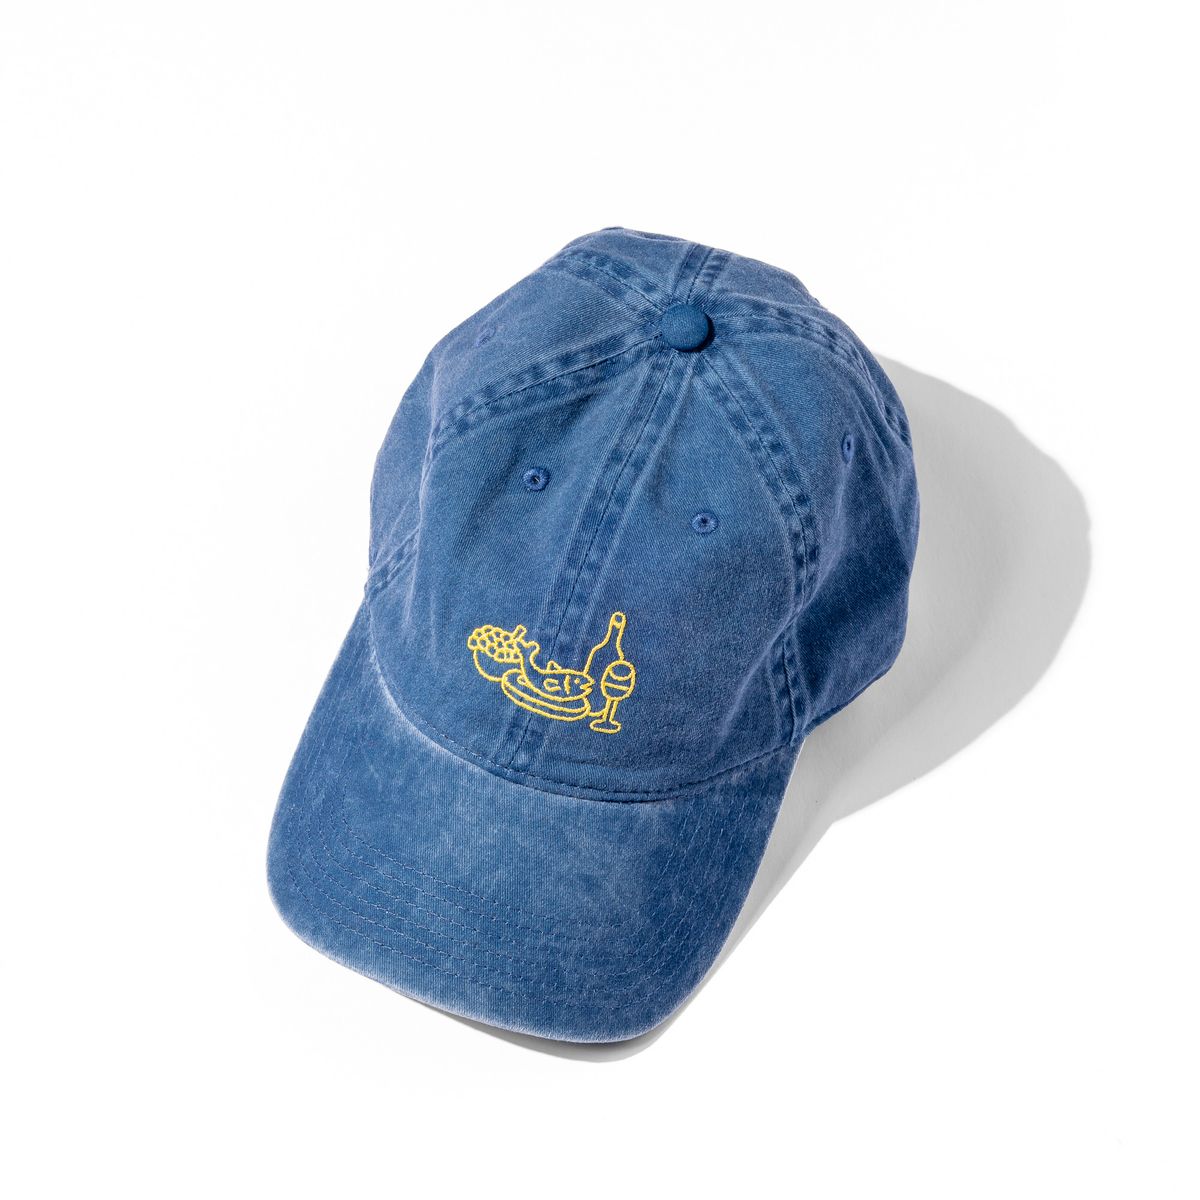 A classic blue baseball hat with yellow embroidery on the front depicting a feast of fish, fruit and wine.